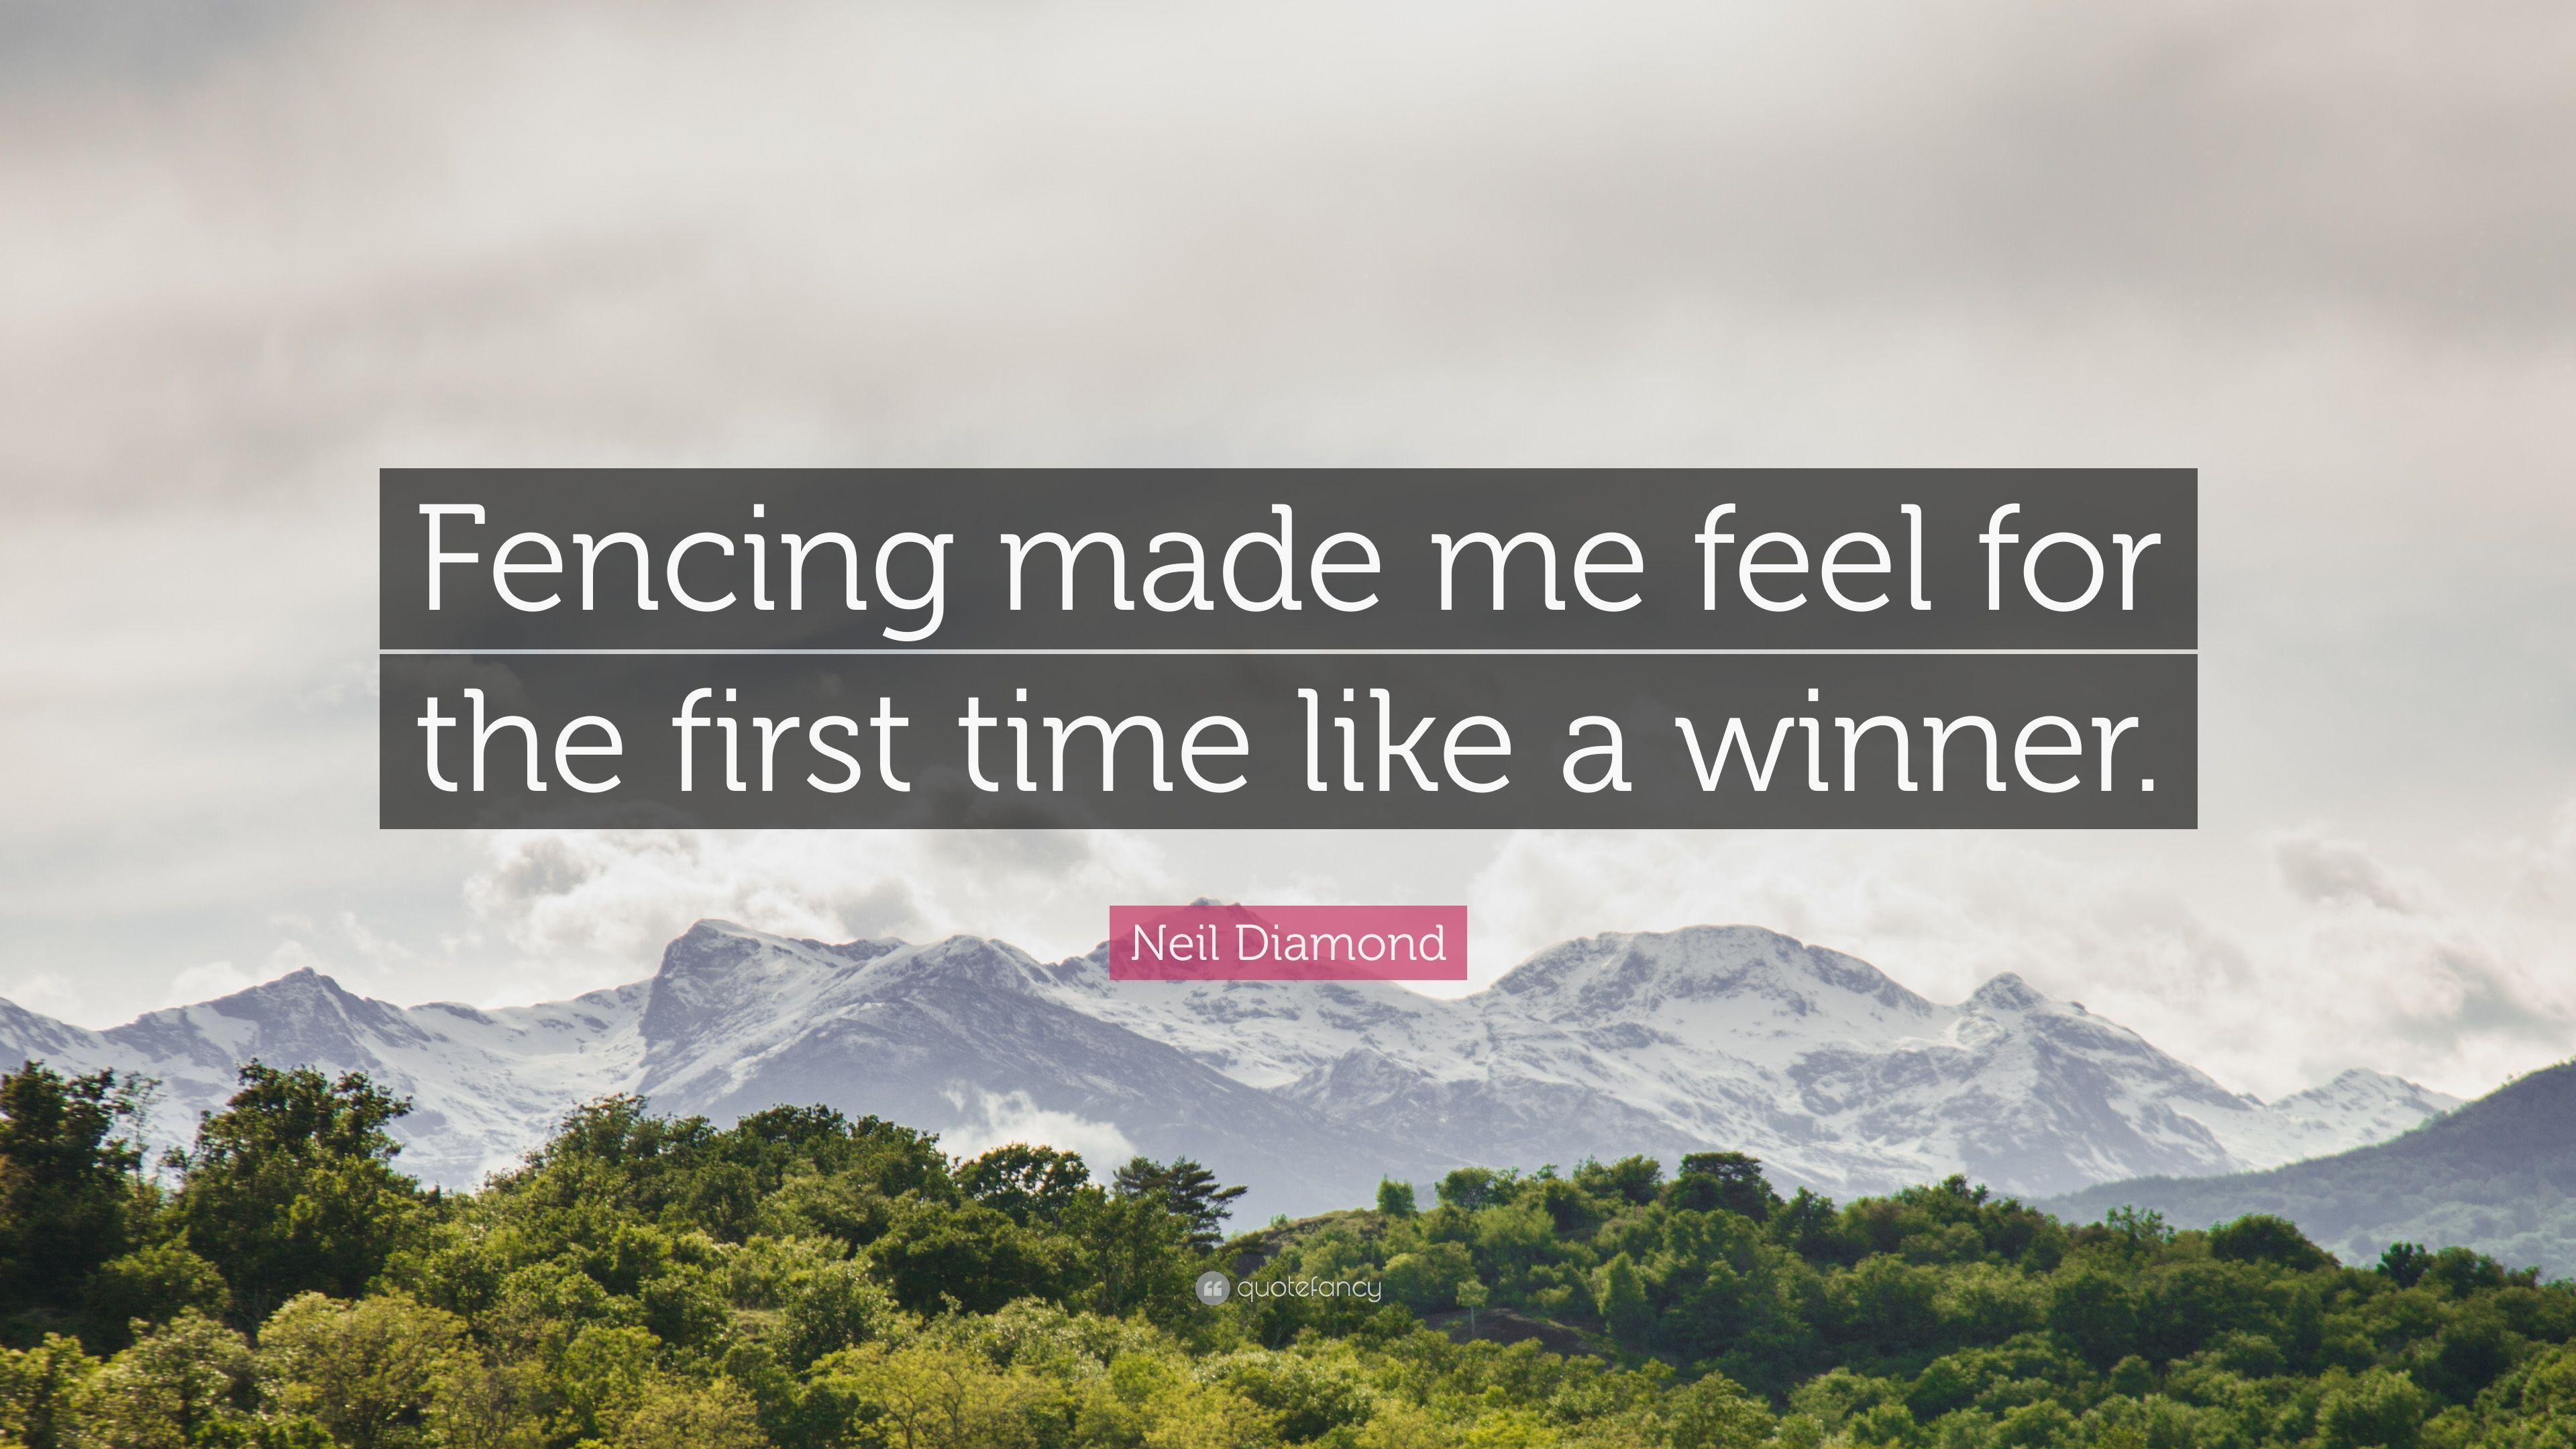 Neil Diamond Quote: “Fencing made me feel for the first time like